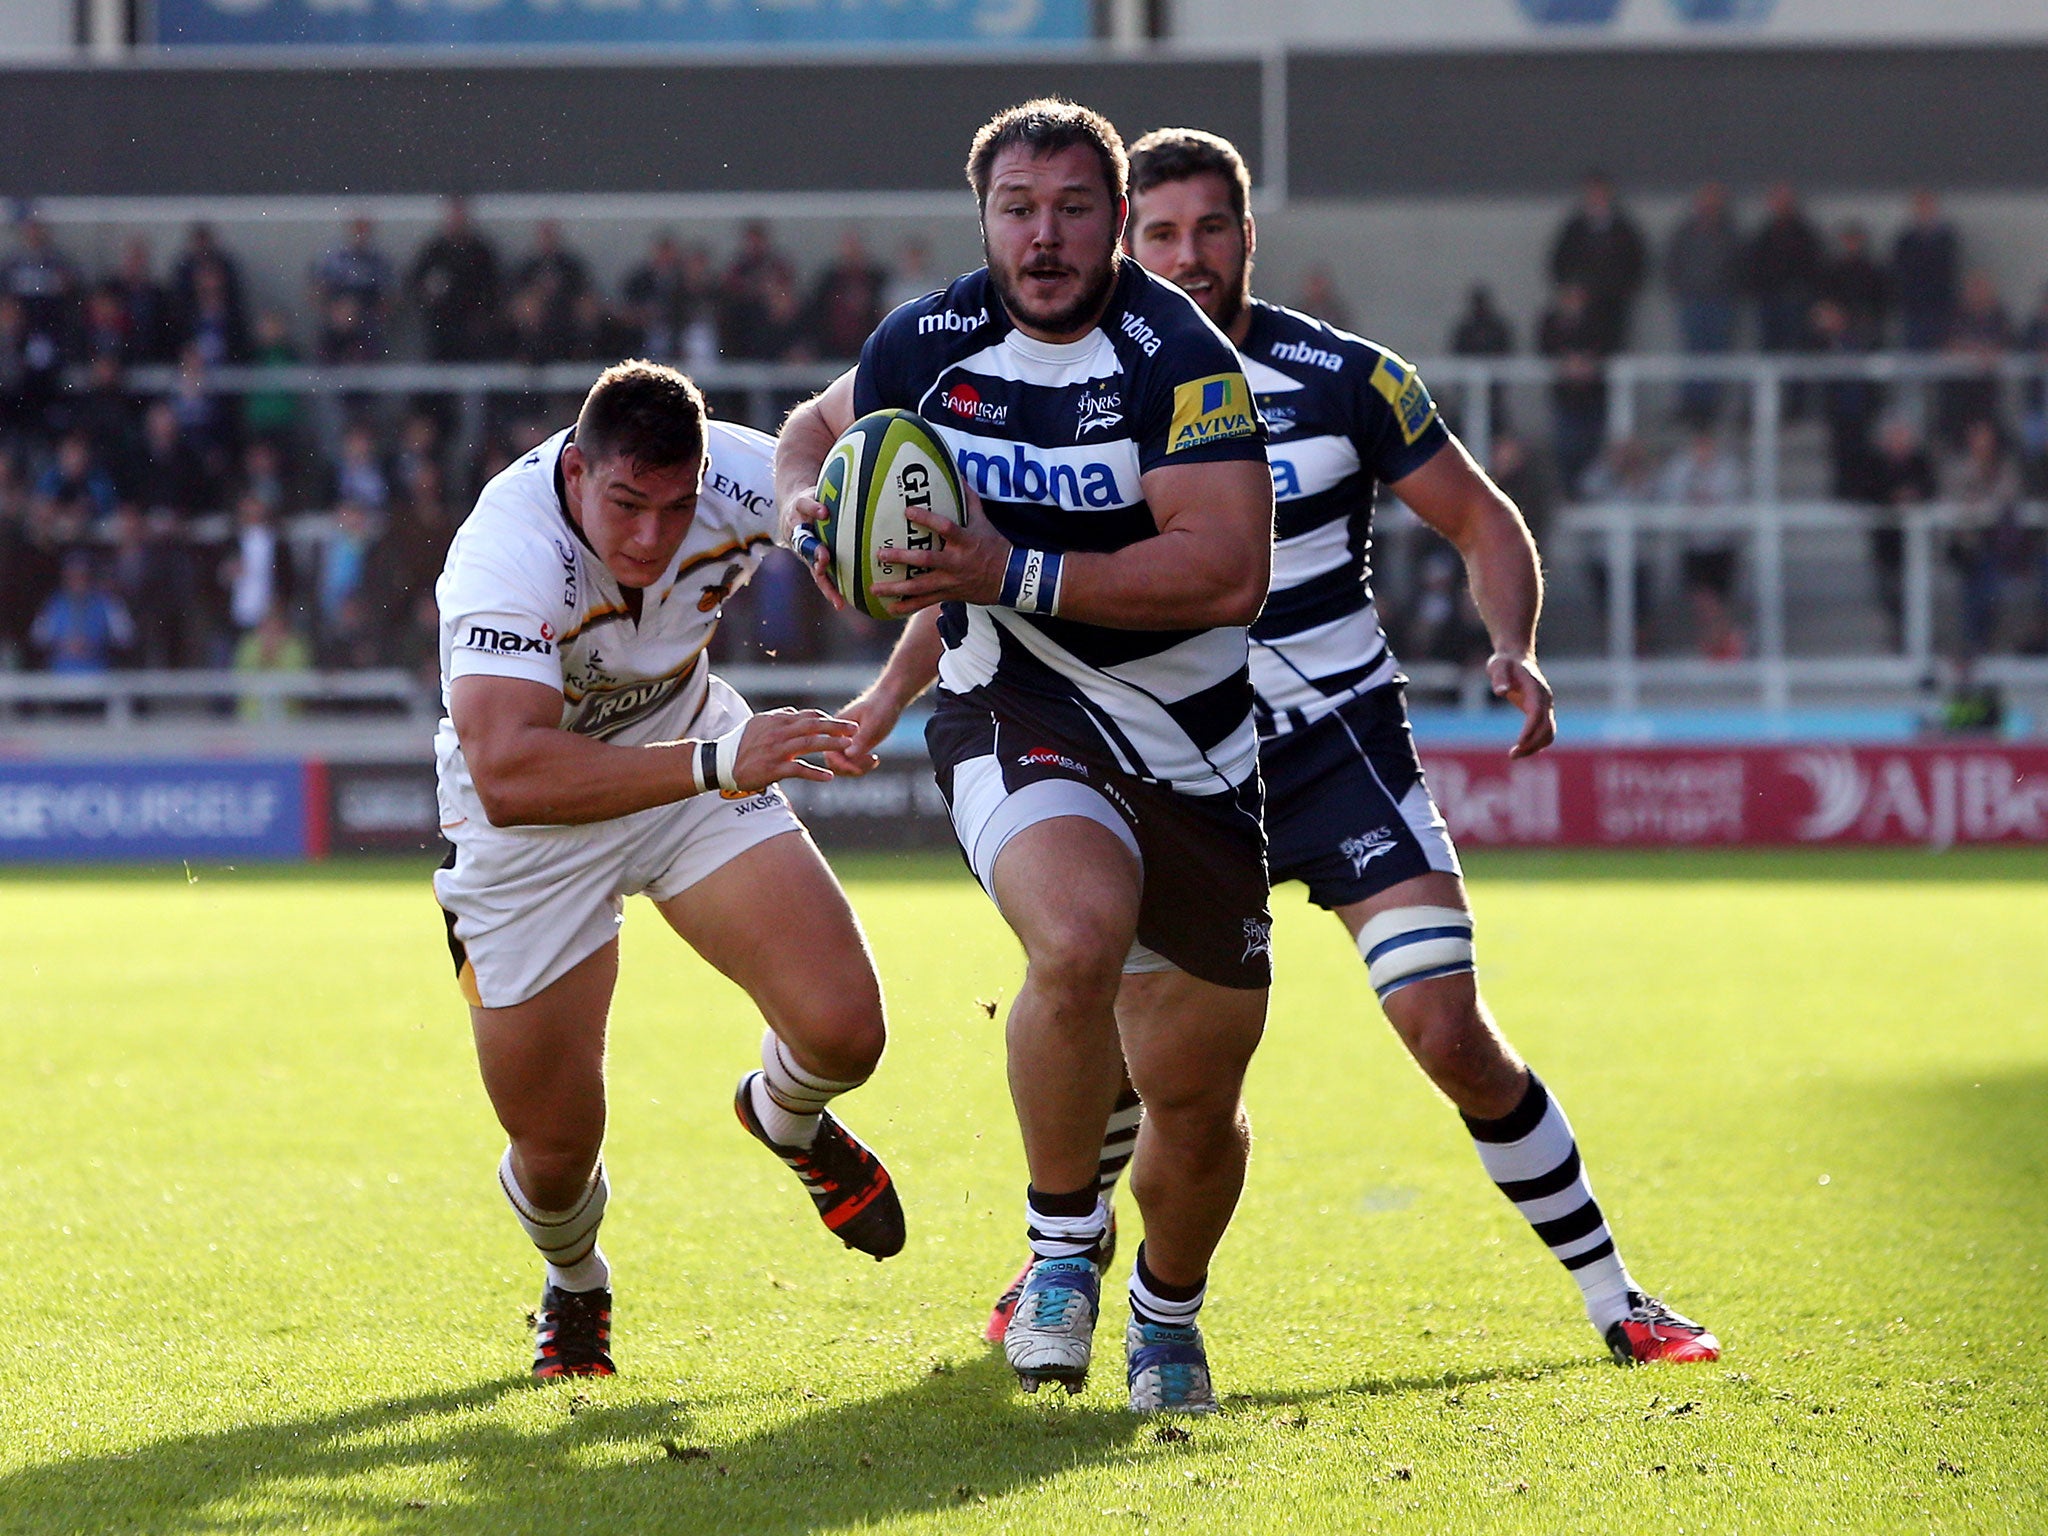 Alberto Di Marchi charges through for a try